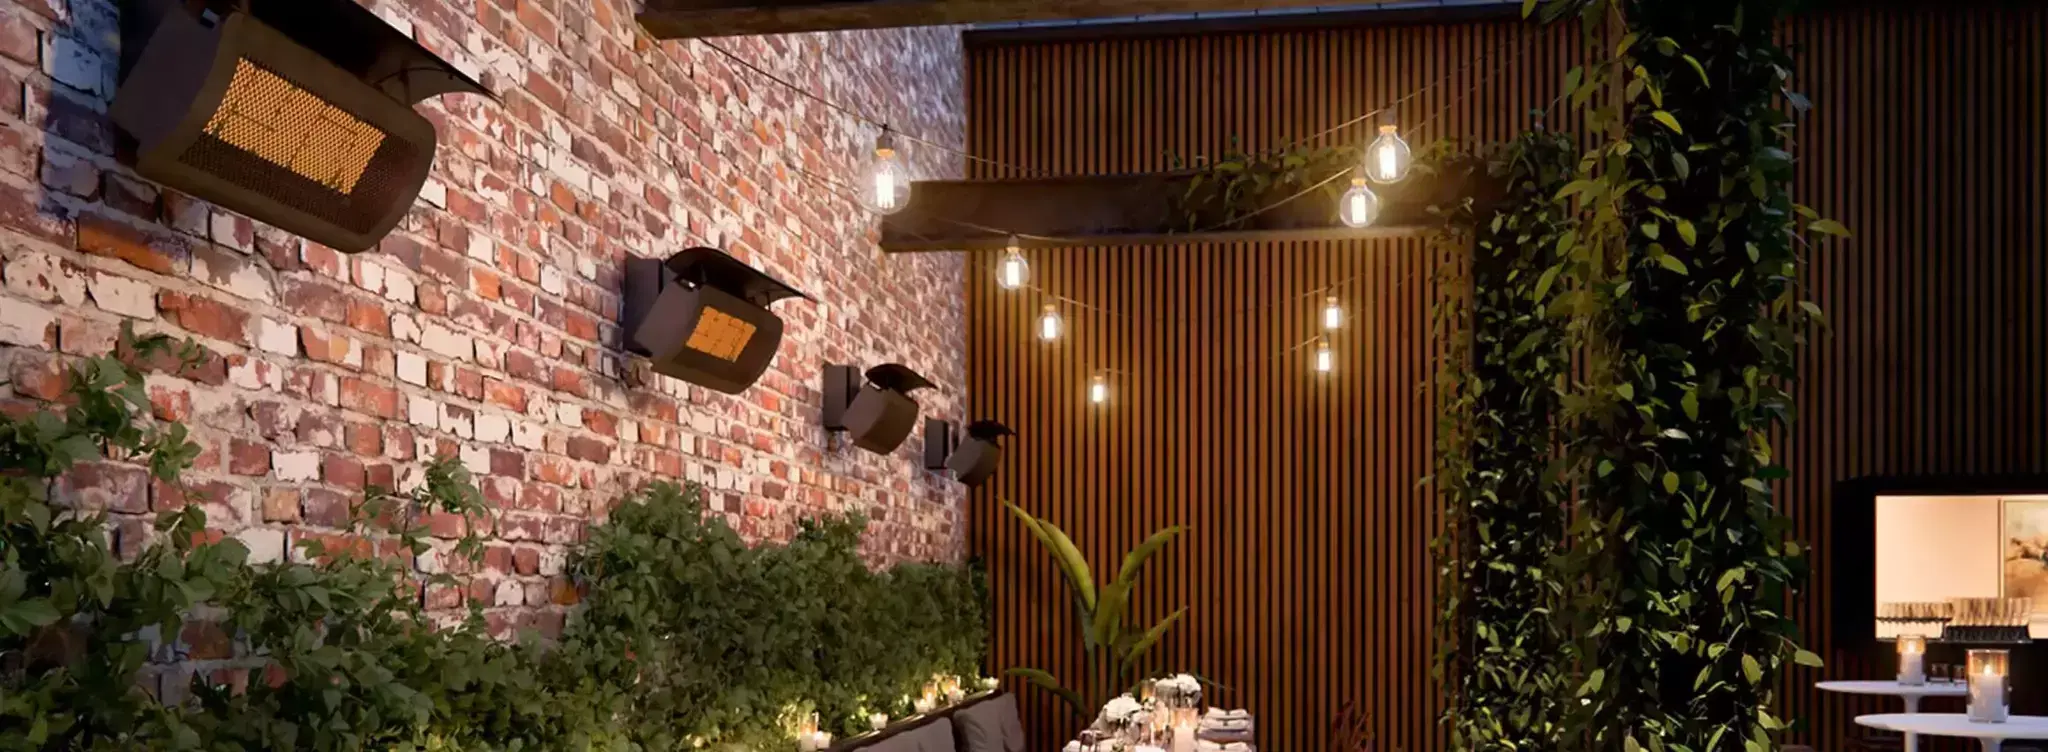 What is an infrared patio heater—and do you need one?